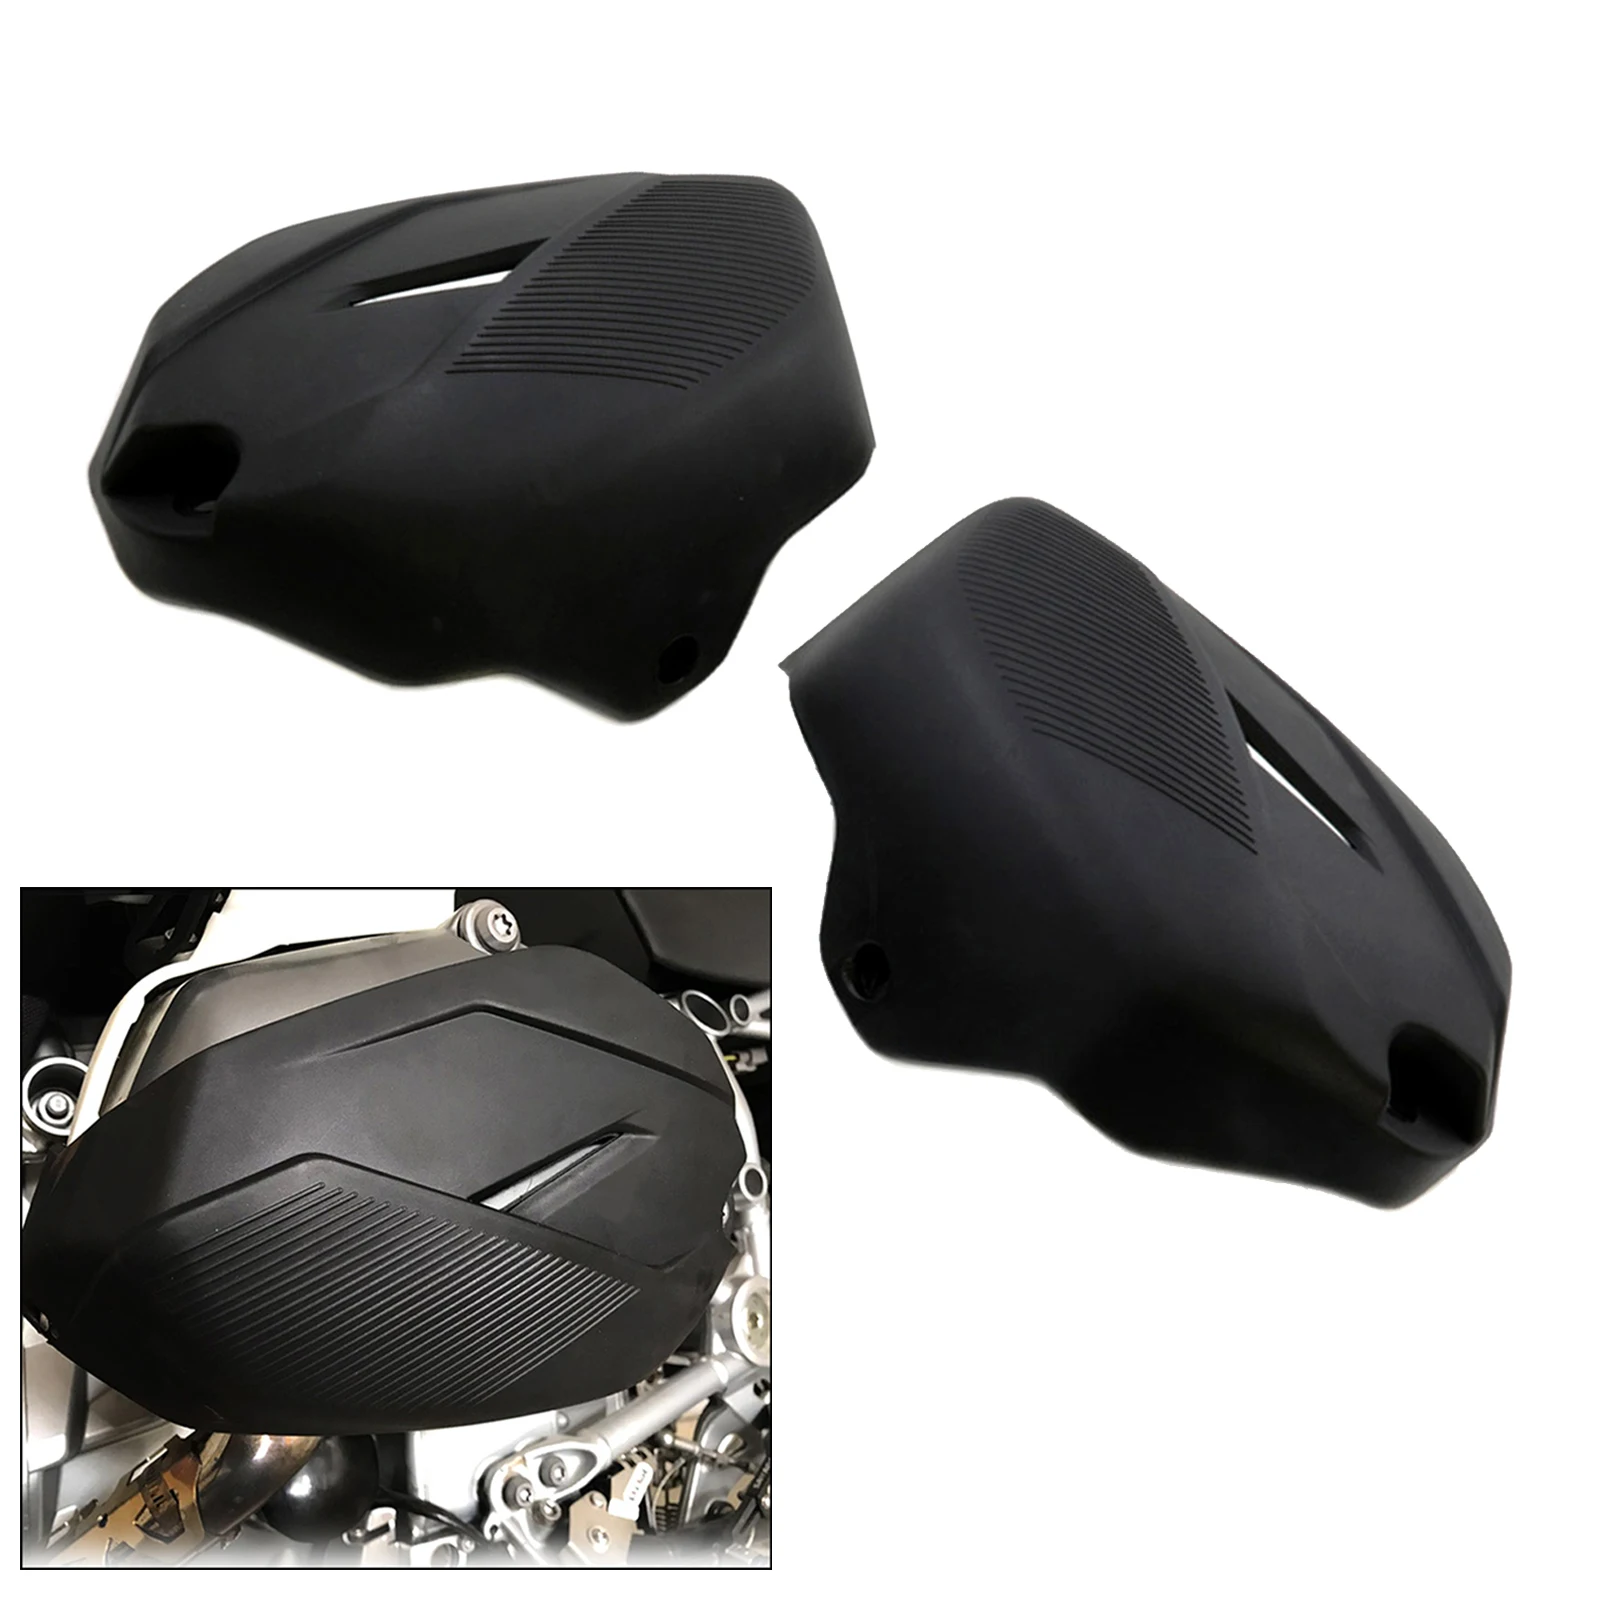 2Pcs Motorcycle Cylinder Head Engine Guards Cover Replacement for  R1200GS LC Adventure R1200R R1200RT 2014-2017